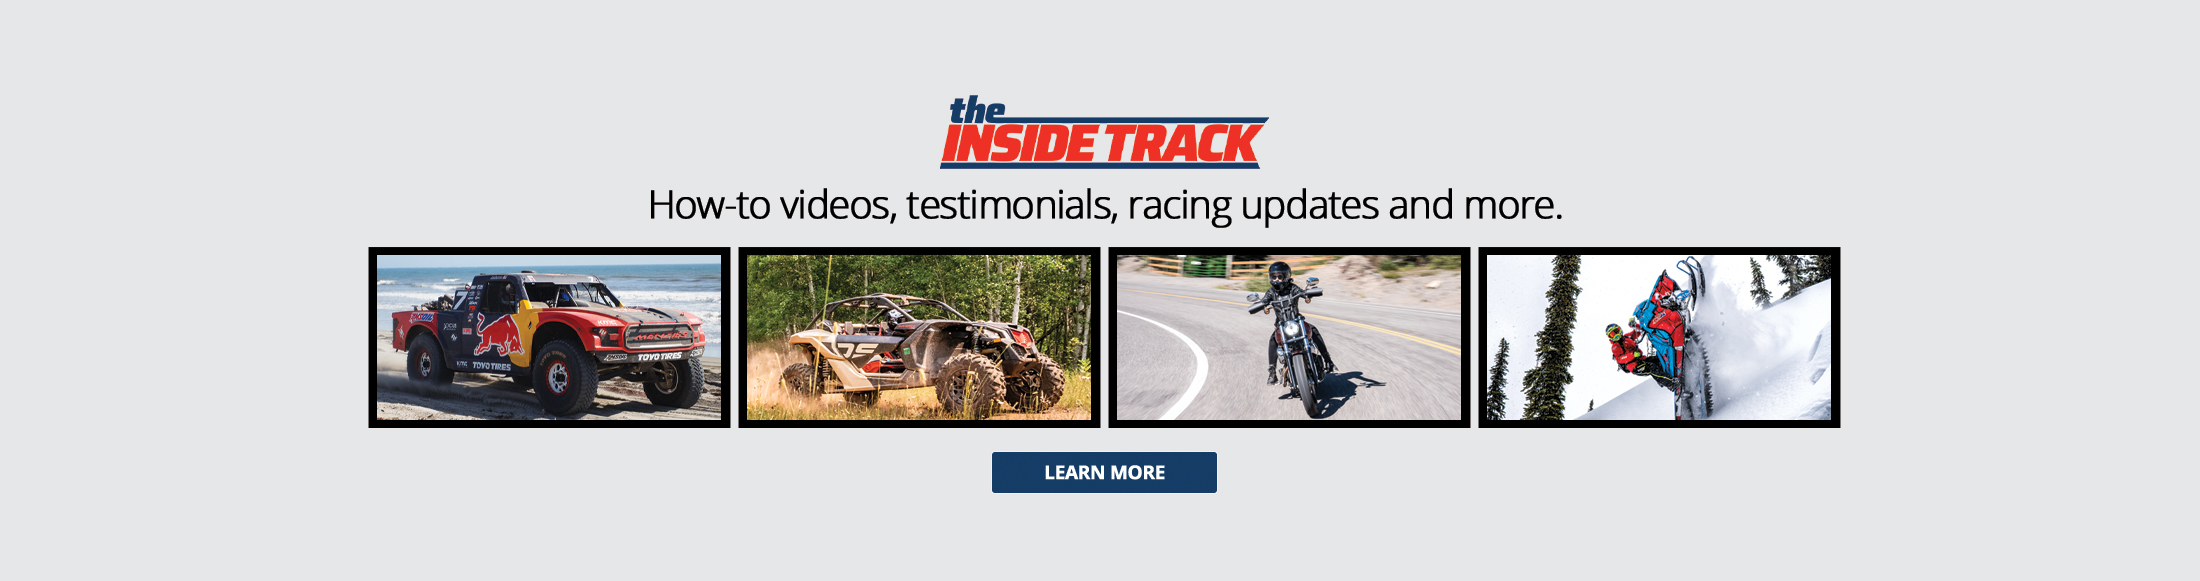 How-to Videos testimonials, racing updates and more - the Inside Track